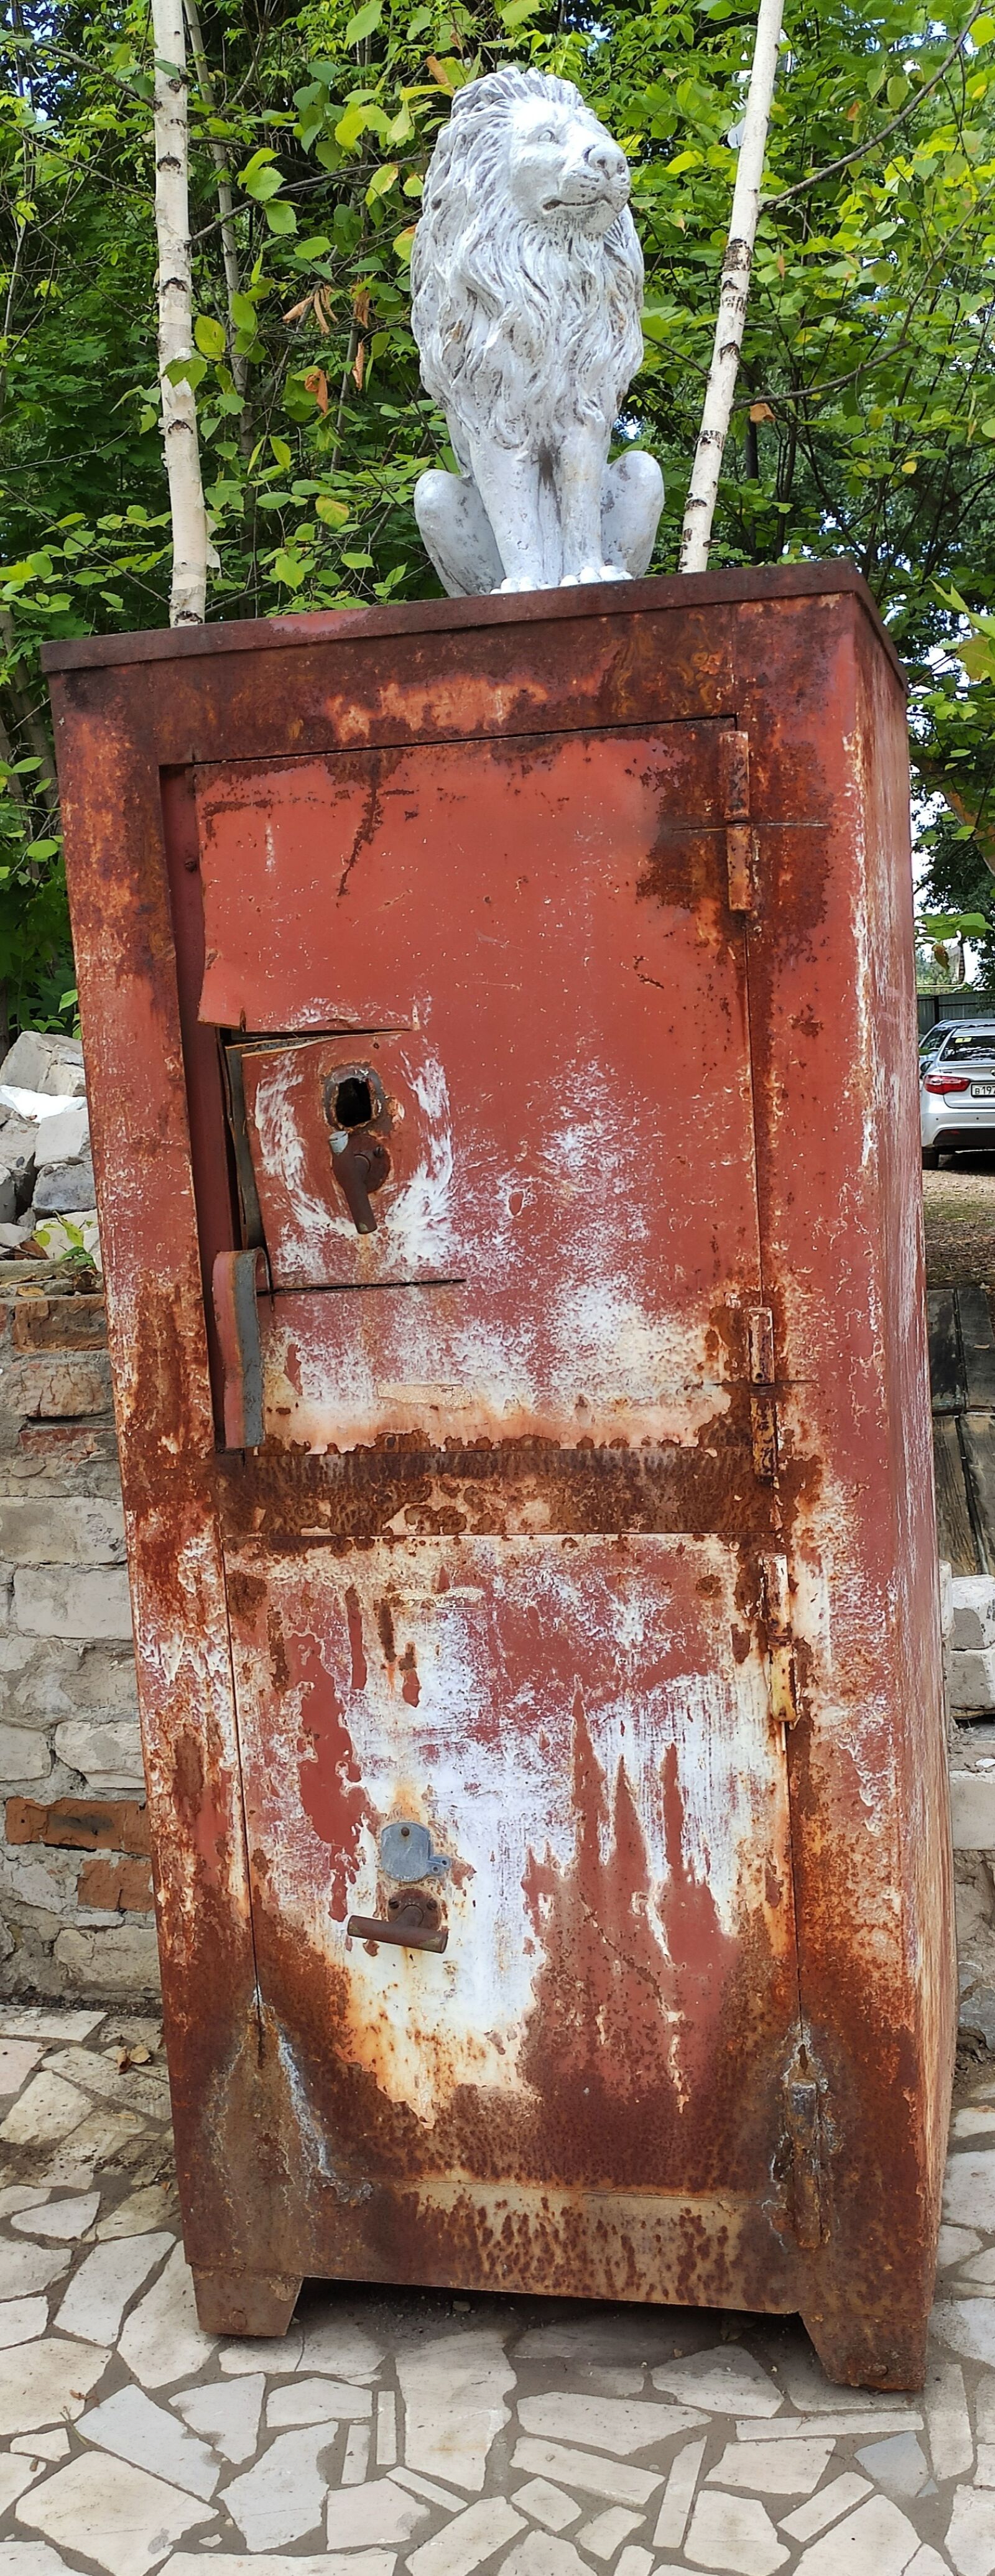 Xiaomi Mi 9T sample photo. Rustic, rusted safe, safe photography